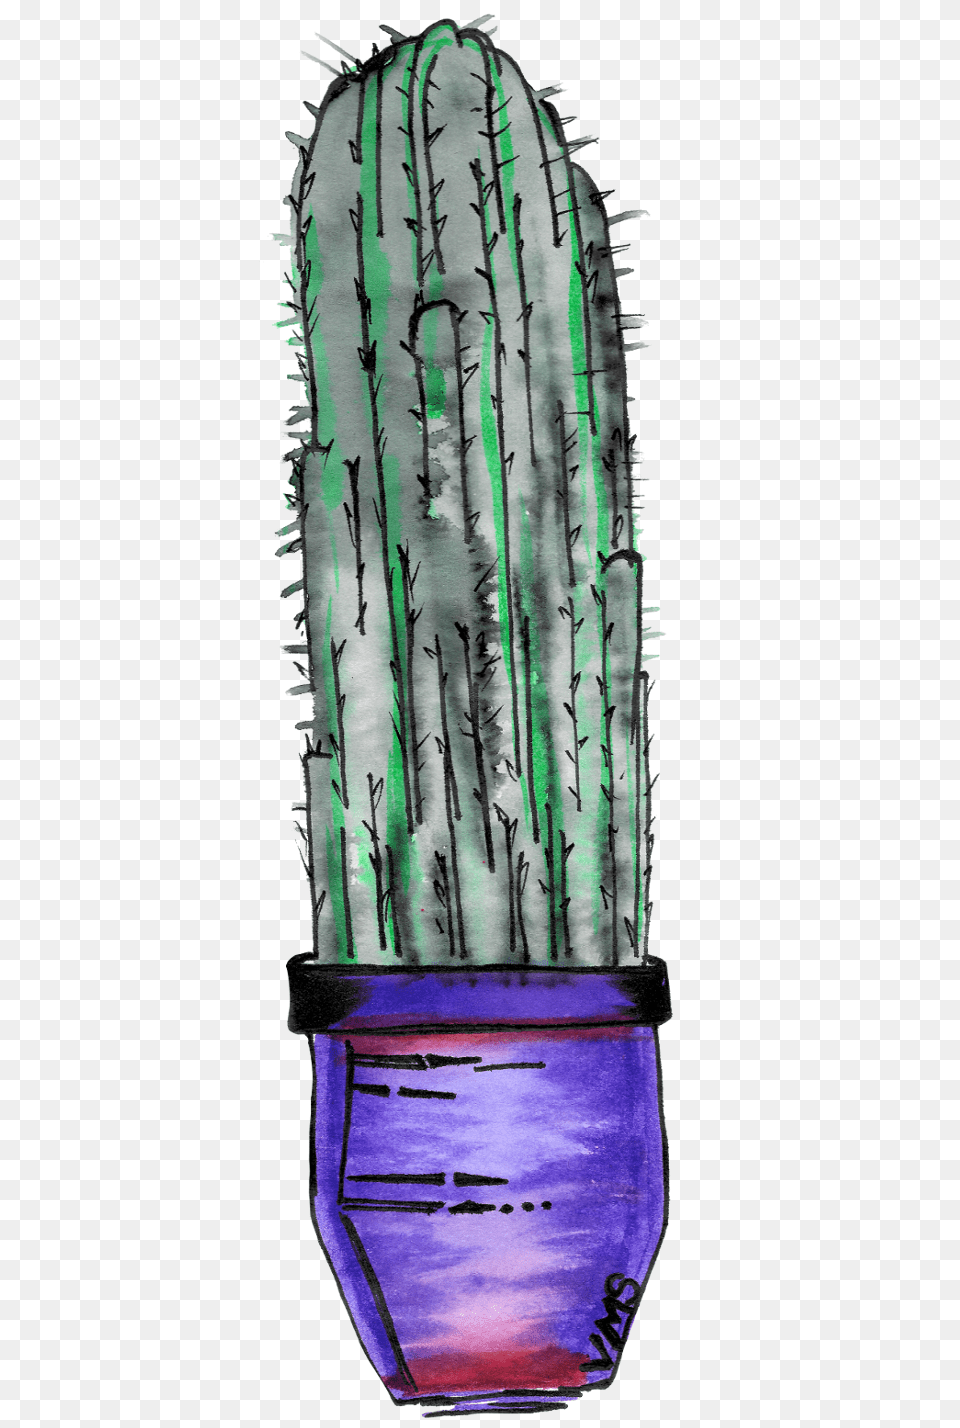 Watercolor Cactus Simply Whimsical Art San Pedro Cactus, Plant, Potted Plant Png Image